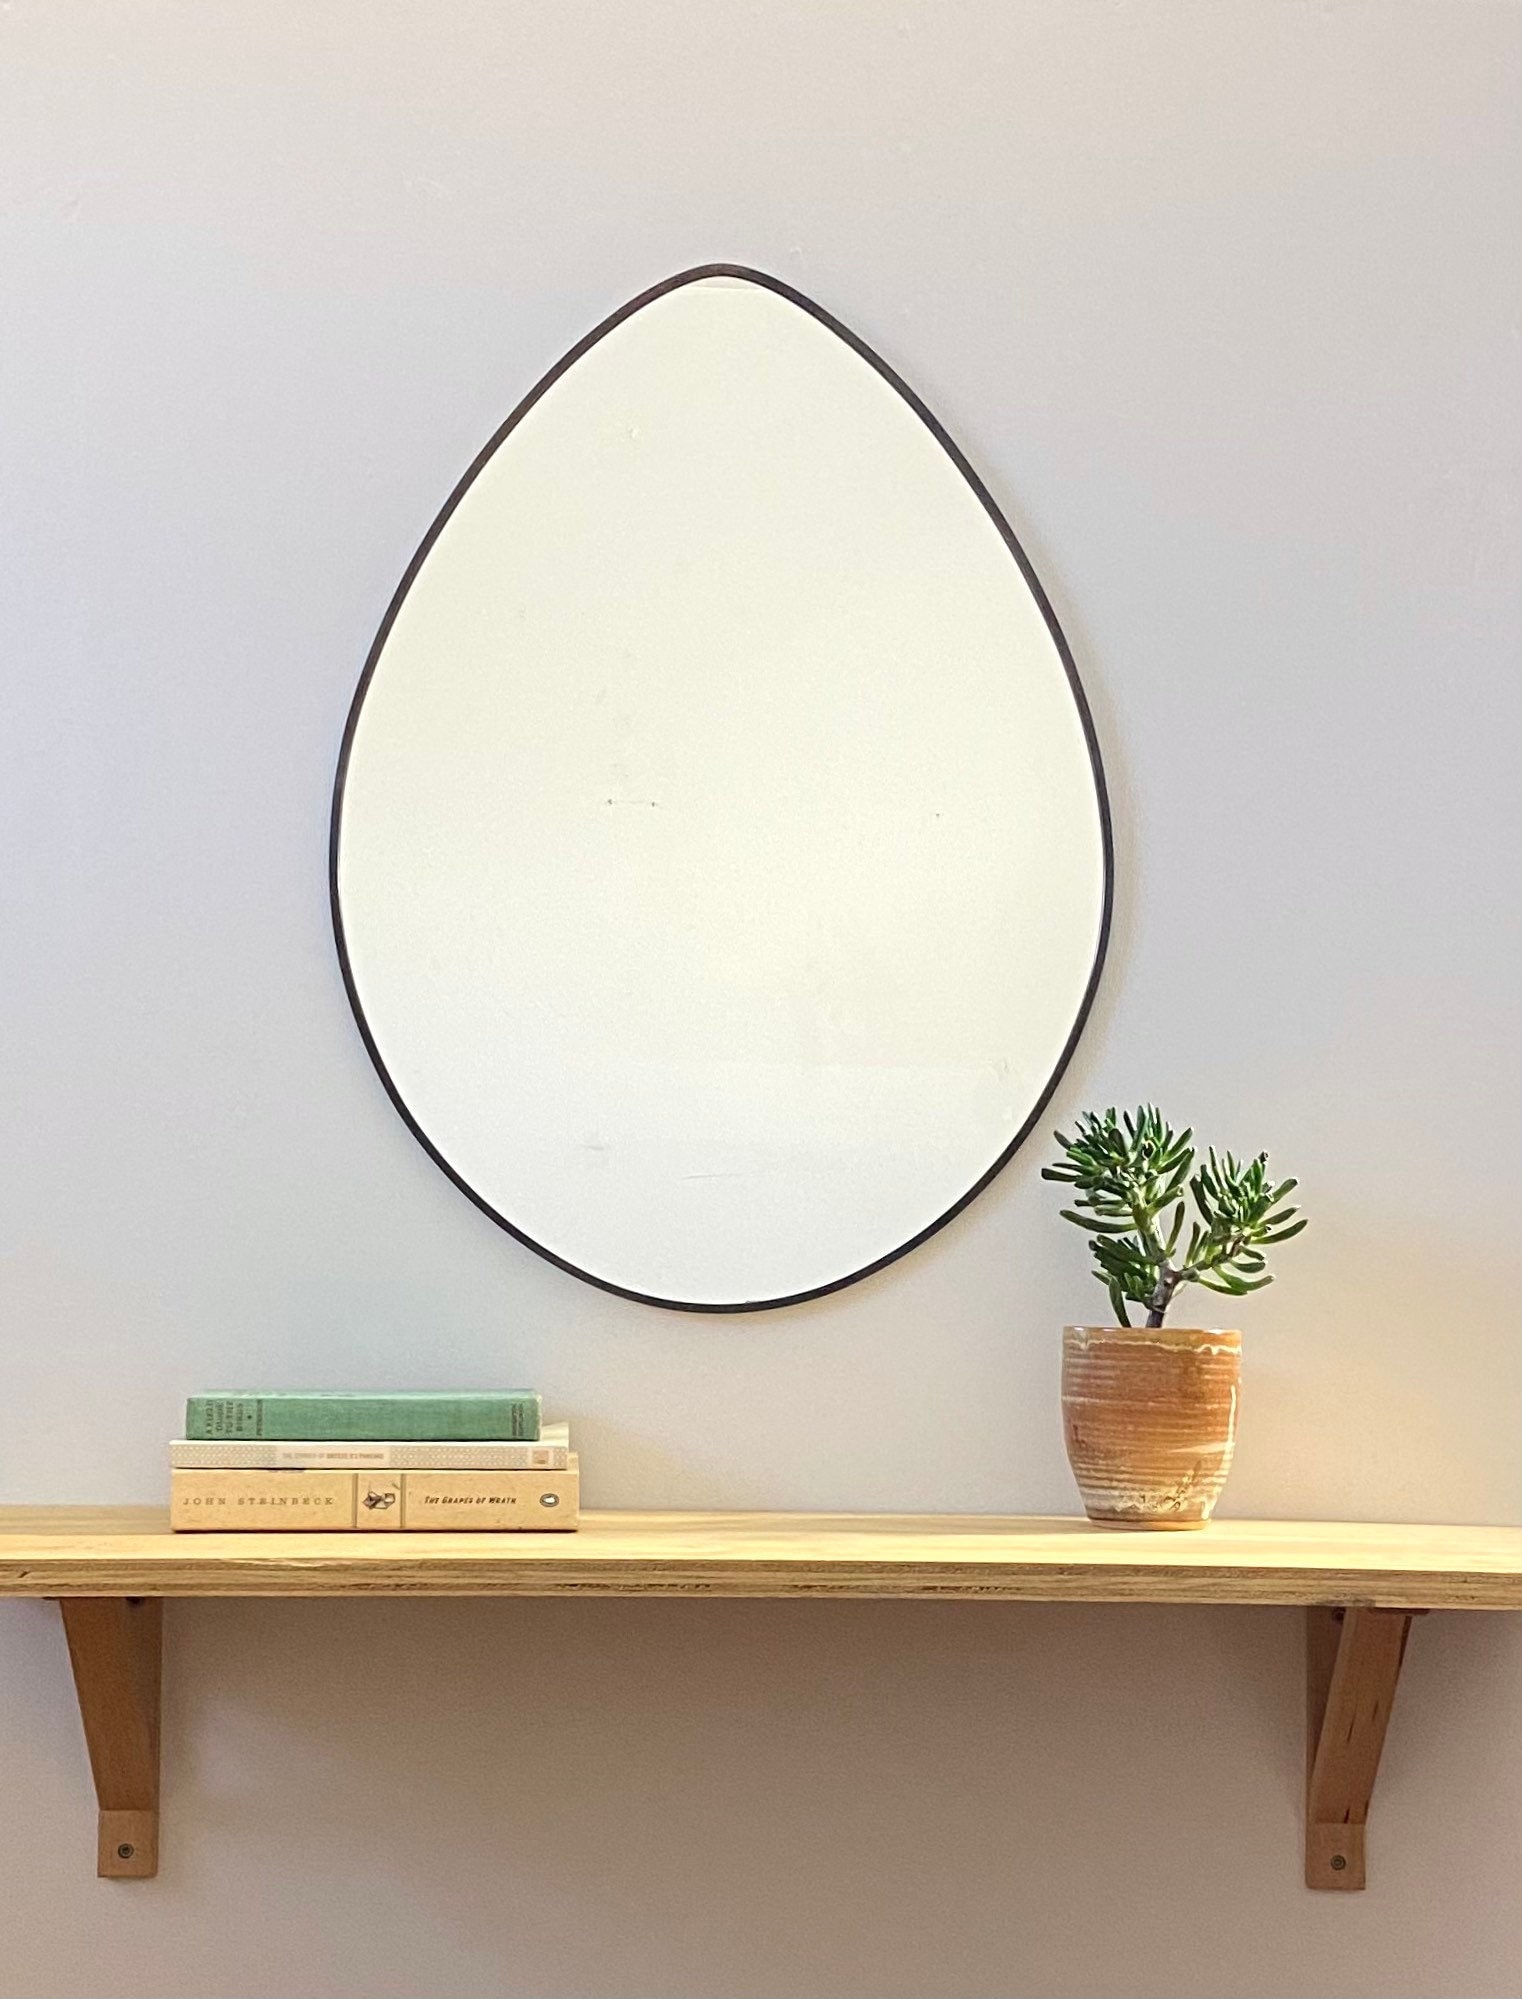 Half Circle Mirror Silver Border Handmade Wall Mirror Round Mirror Oval  Modern Silver Metal Frame Flux Glass  TV Television Commercial -   Norway